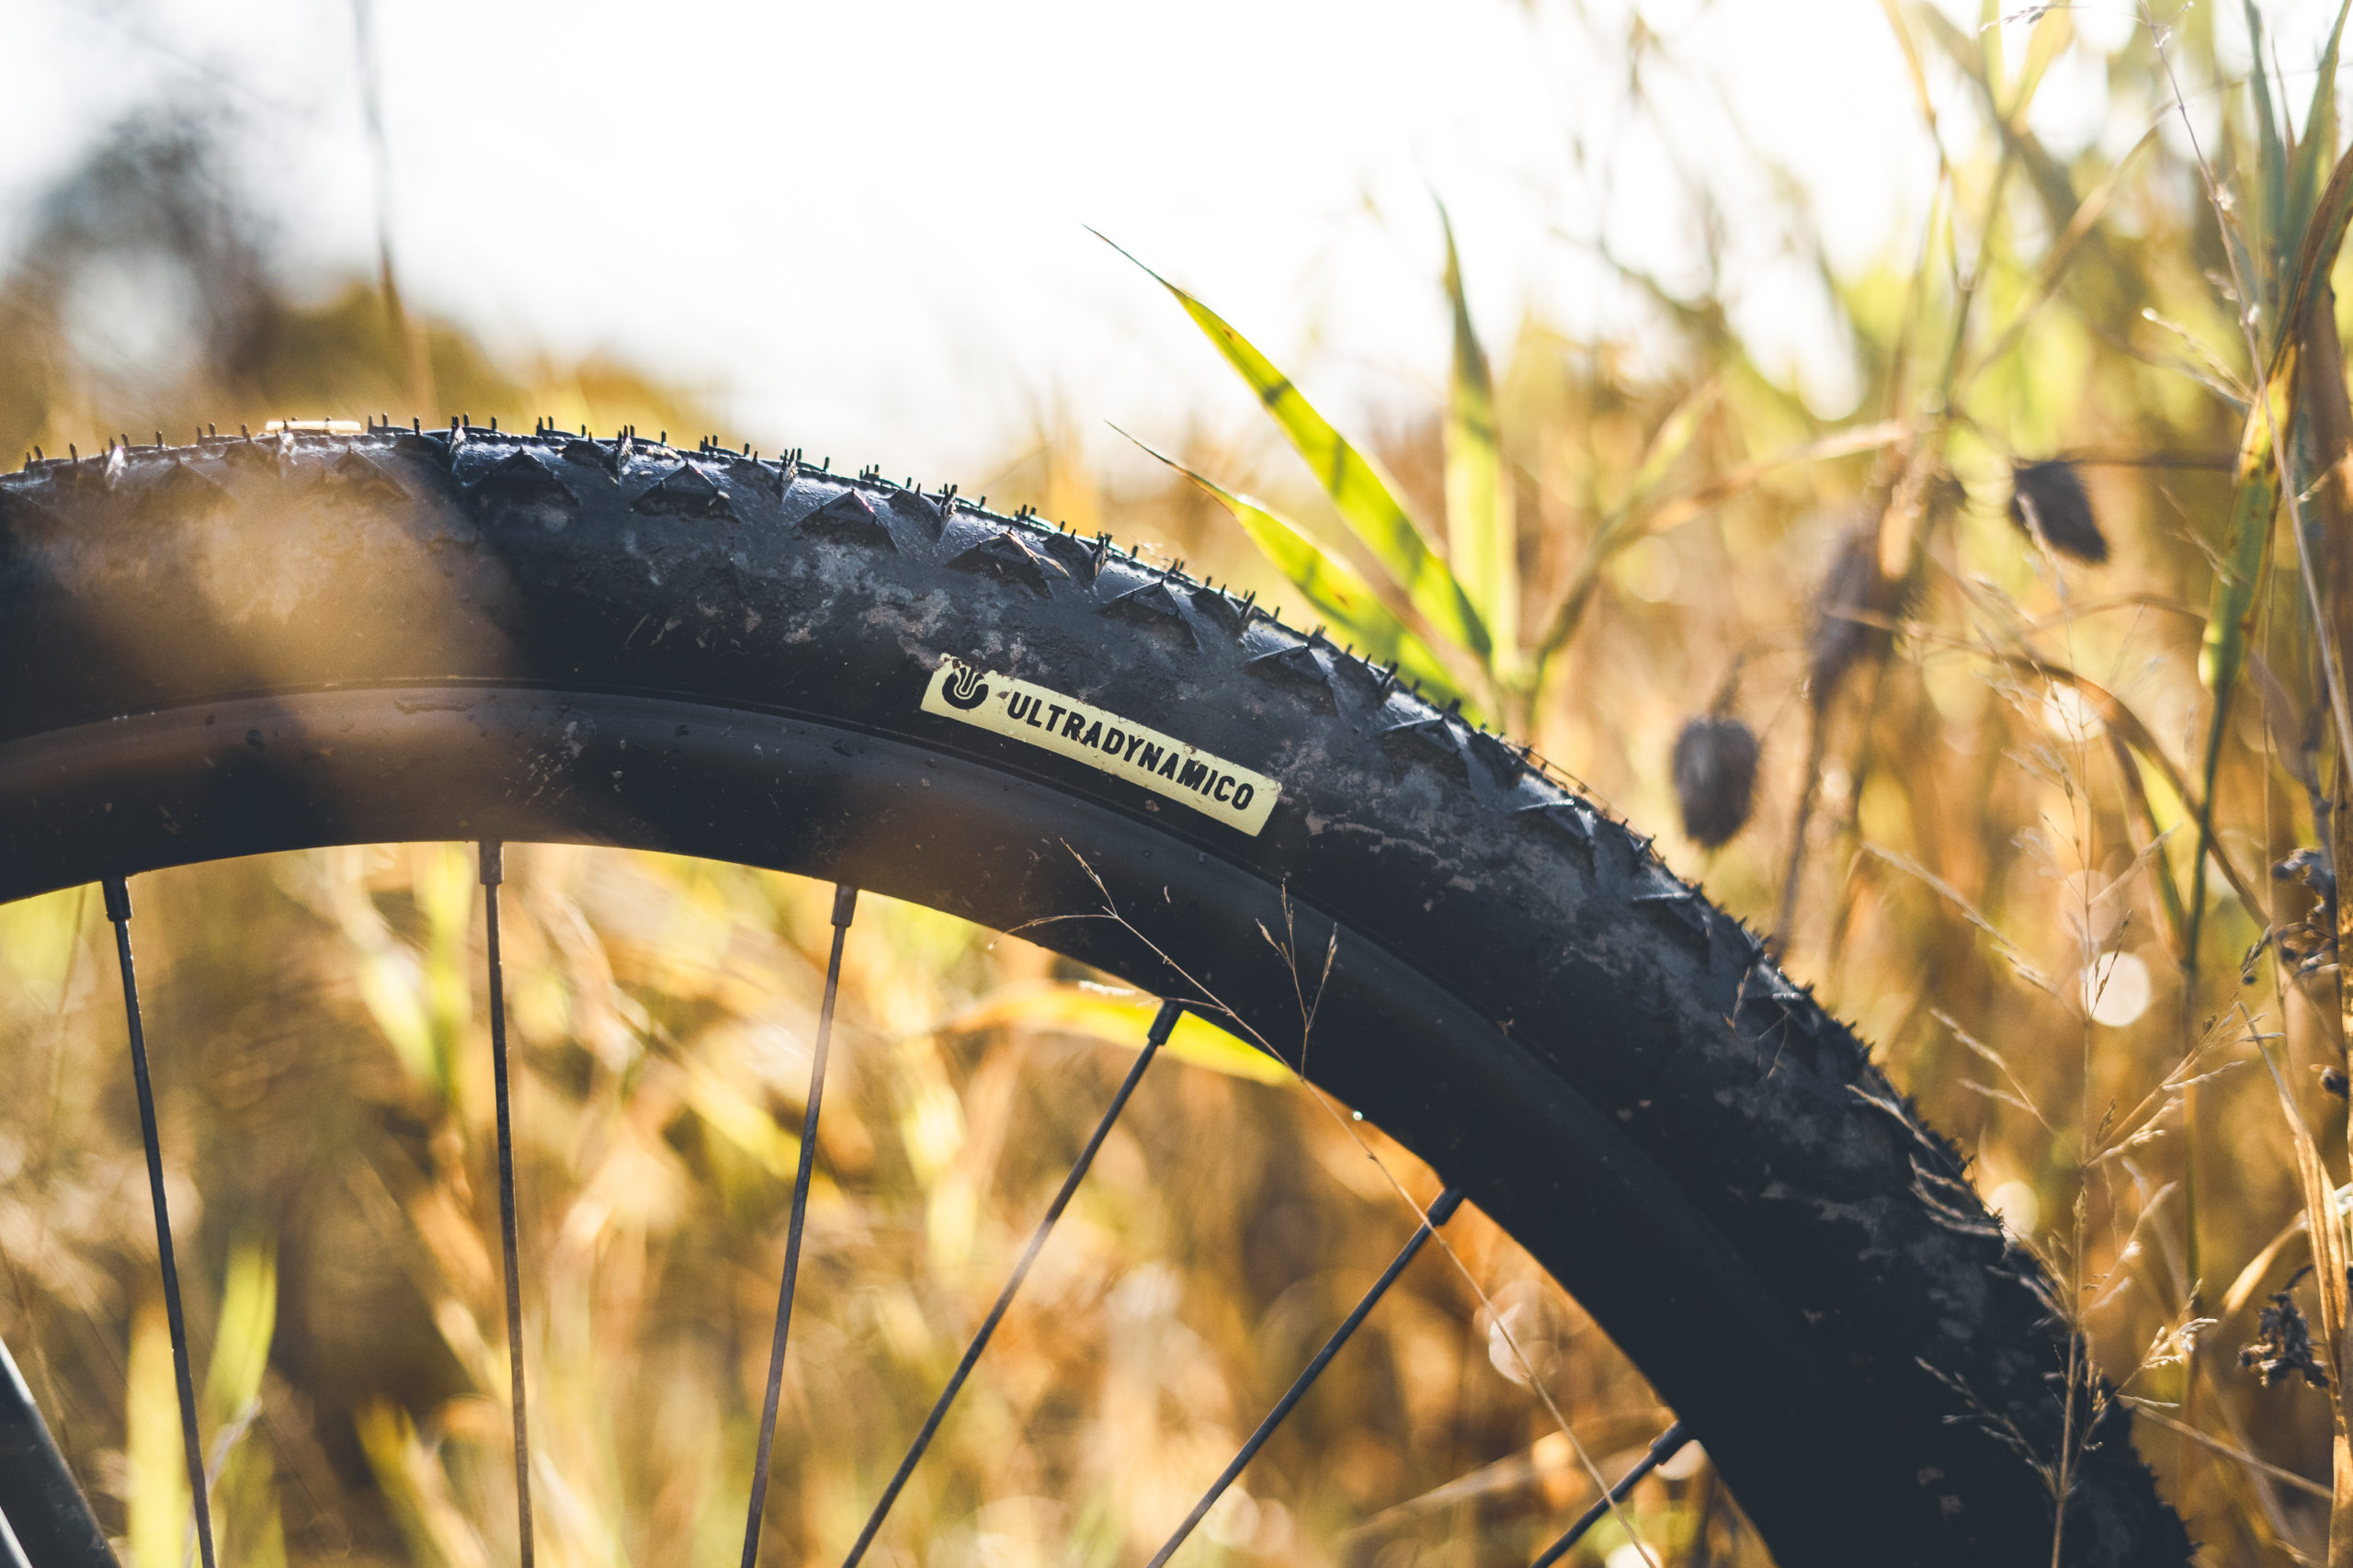 Ultradynamico Rosé Robusto tyre review